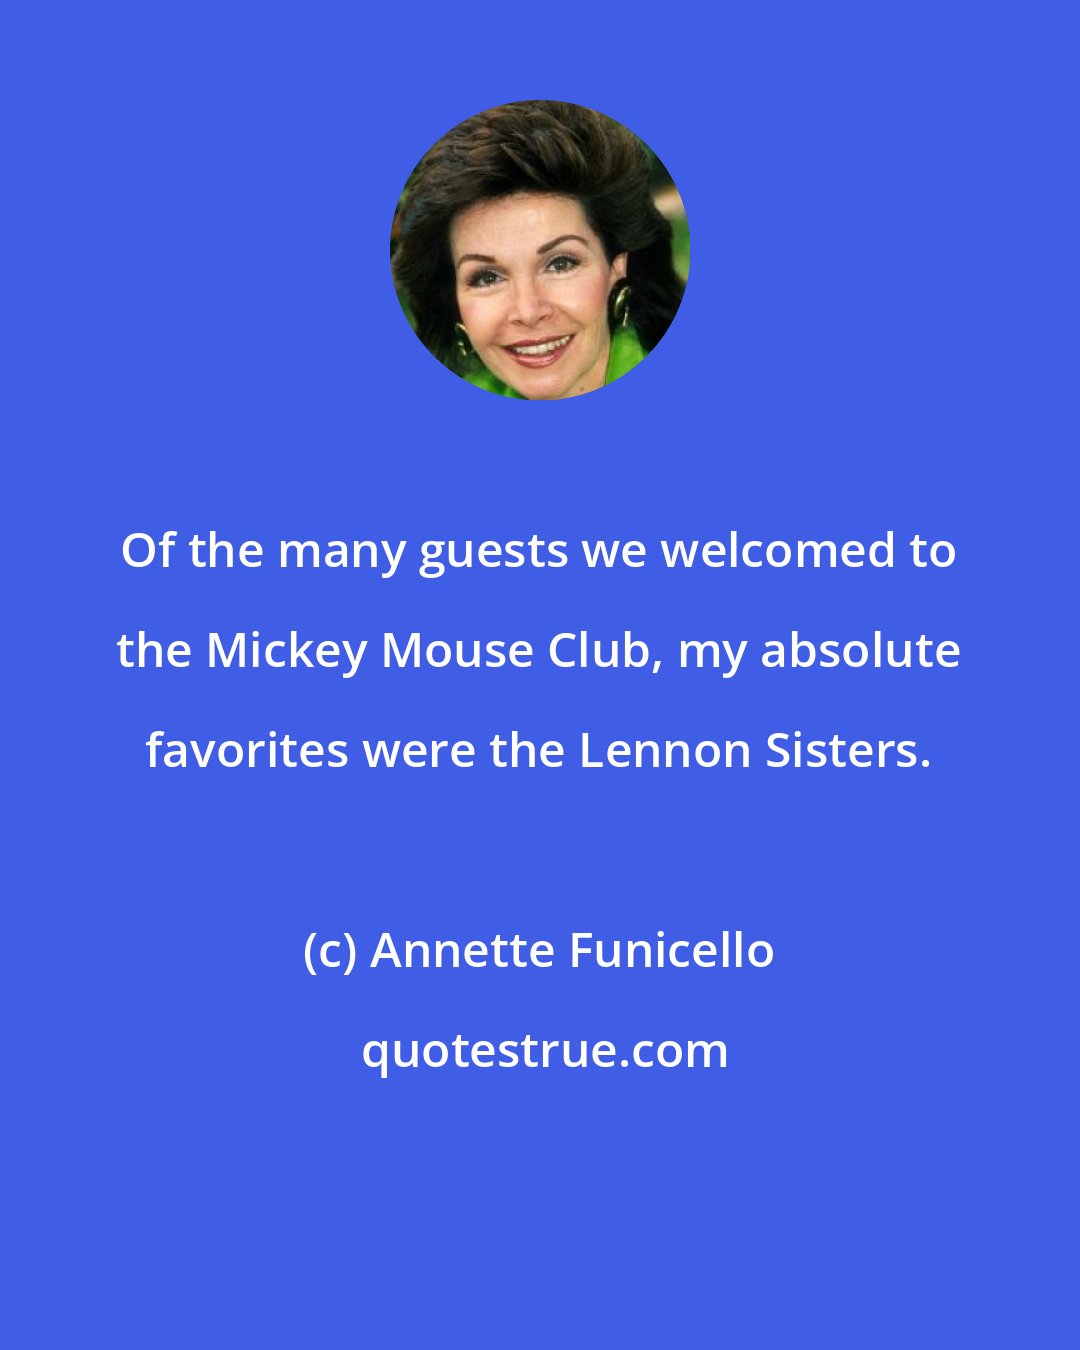 Annette Funicello: Of the many guests we welcomed to the Mickey Mouse Club, my absolute favorites were the Lennon Sisters.